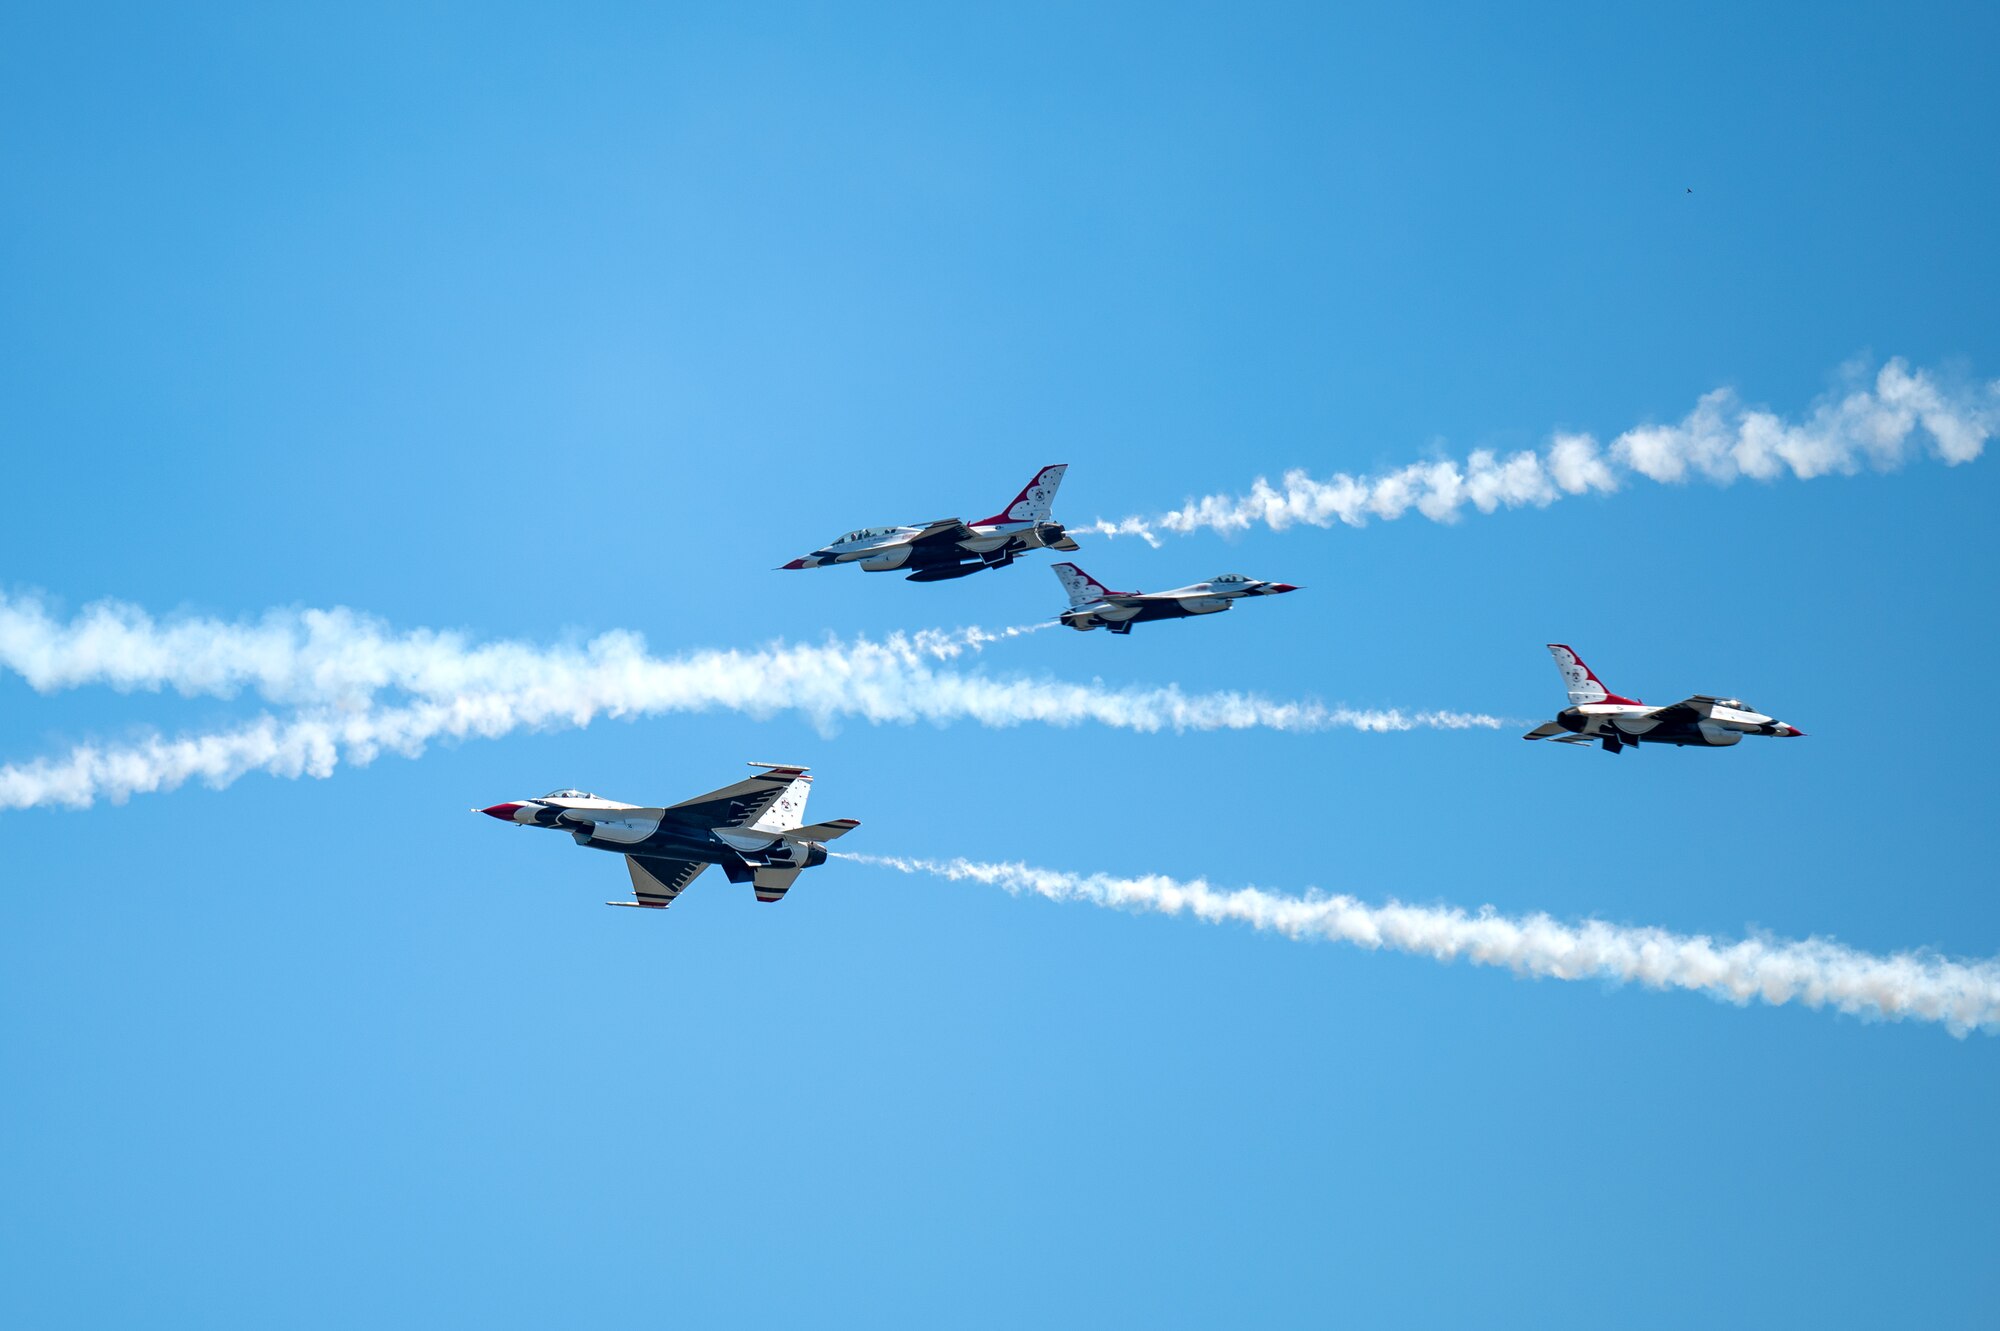 The Thunderbirds perform during a practice session for the 2023 Thunder Over the Sound Air and Space Show at Biloxi Beach in Biloxi, Mississippi, April 28, 2023. Thunder Over the Sound is a unique event where a military installation and its surrounding city jointly host an air show in two locations; Biloxi Beach and Keesler's flightline. (U.S. Air Force photo by Airman 1st Class Trenten Walters)